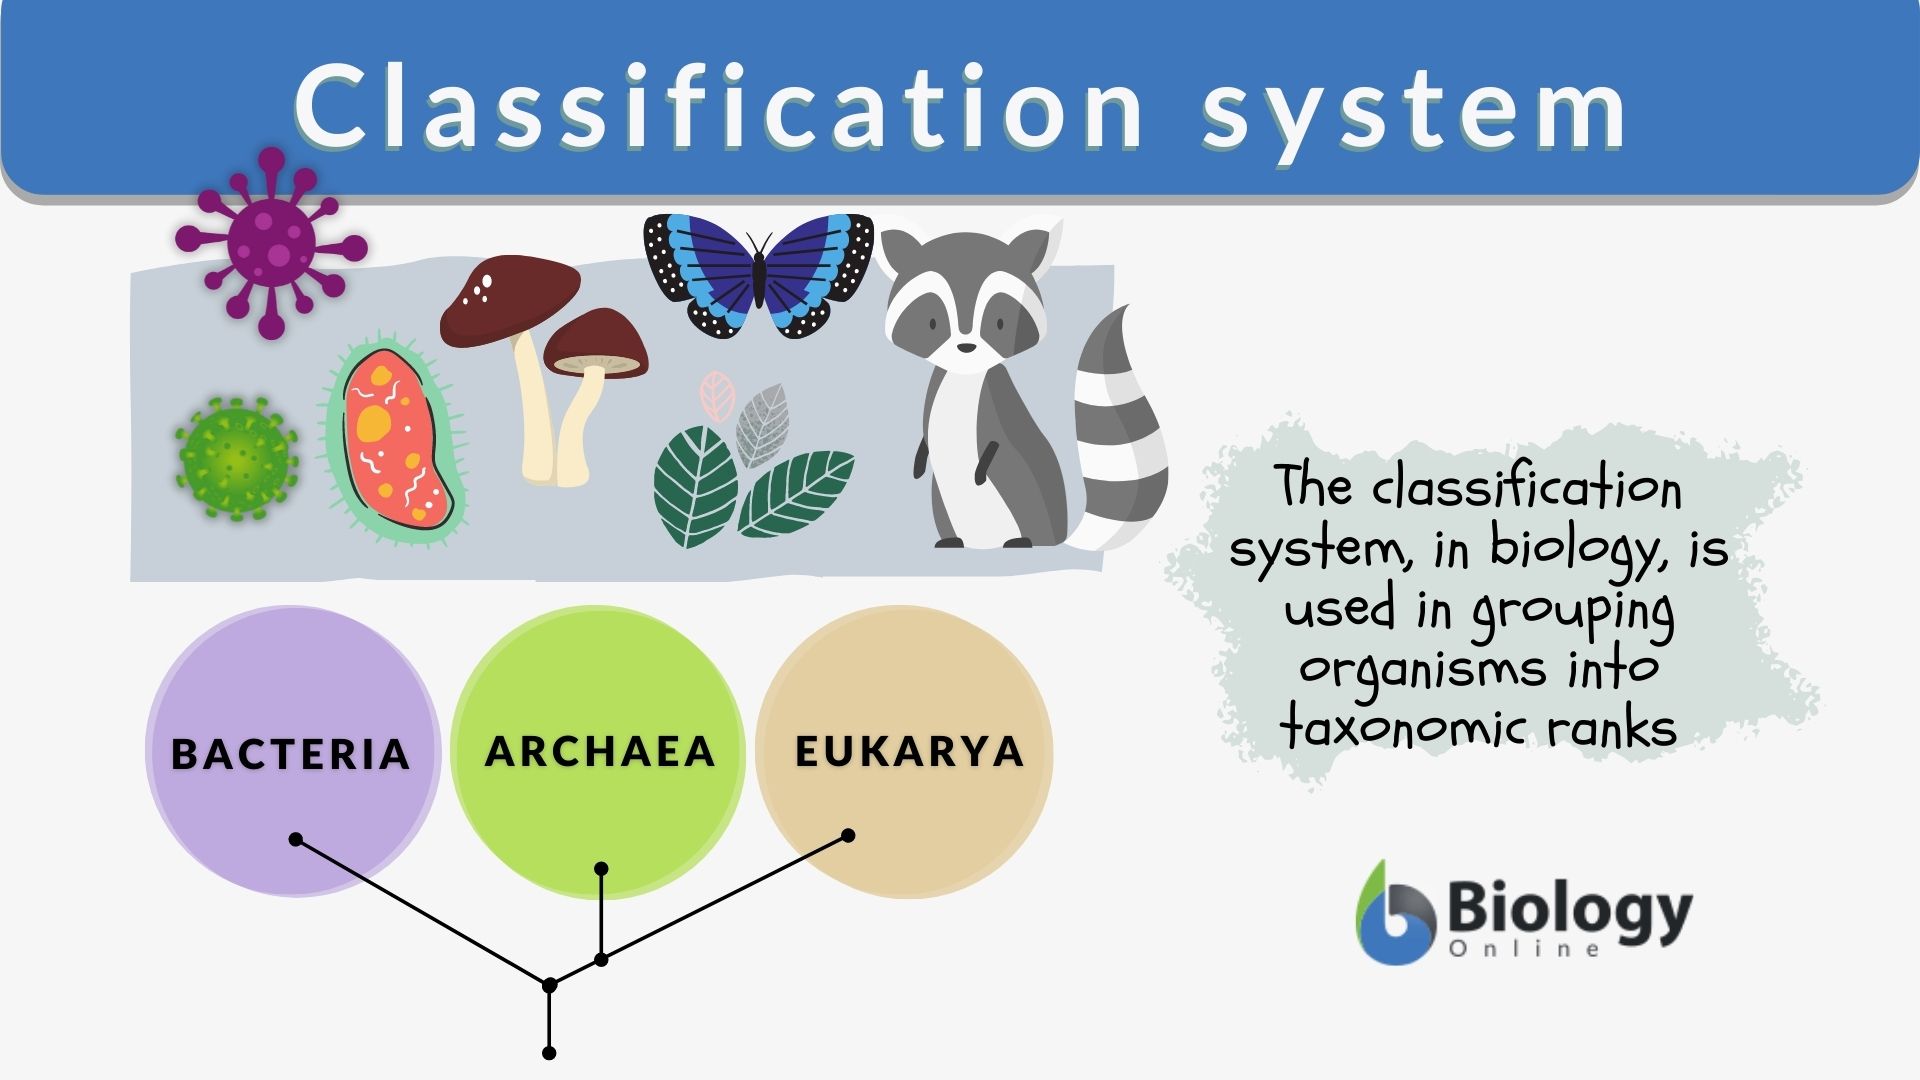 Classification system - Definition and Examples - Biology Online Dictionary